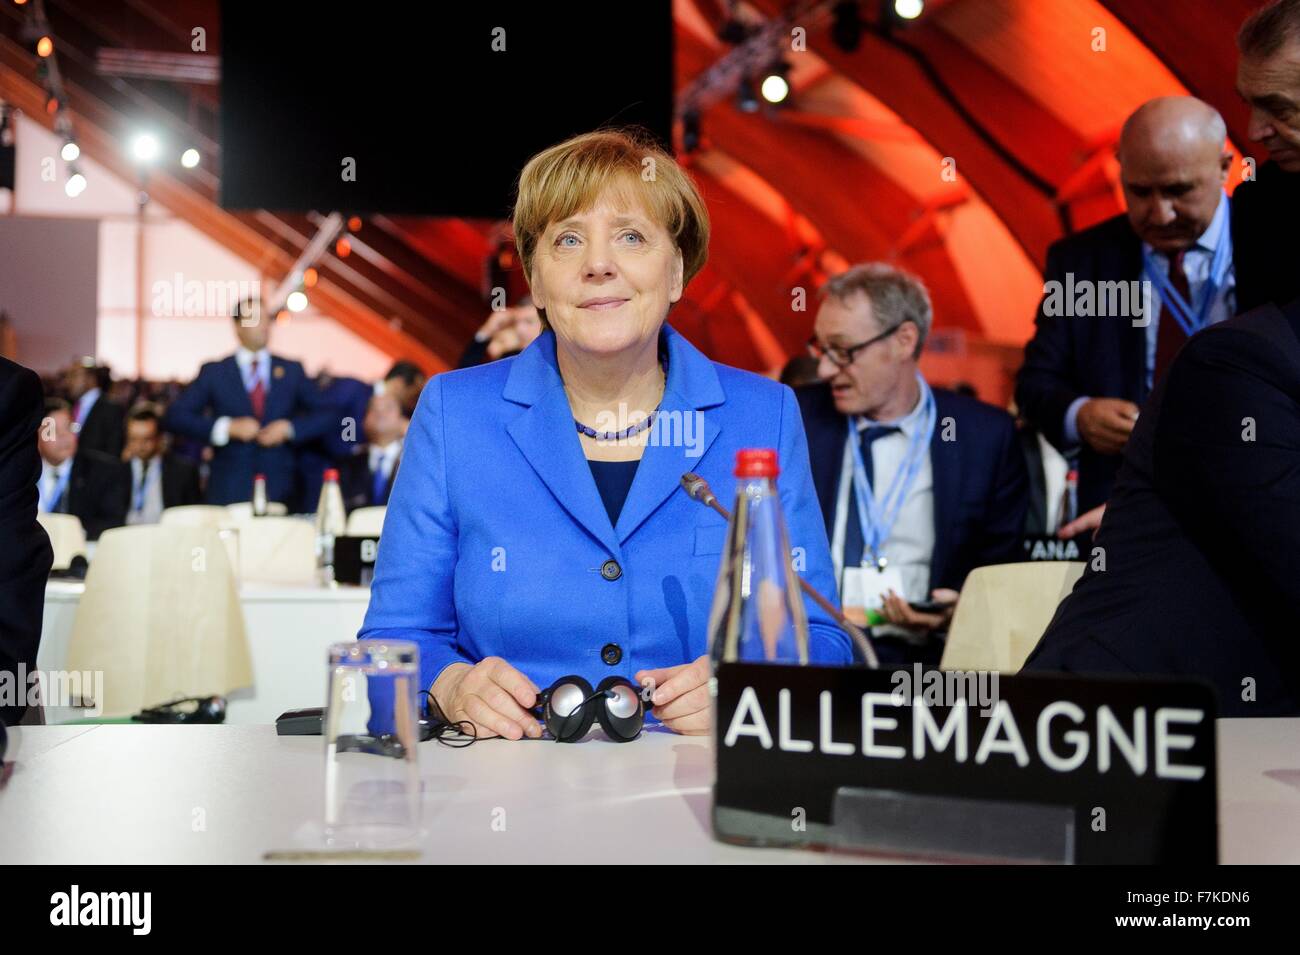 Le Bourget, France. 30th November, 2015. German Chancellor Angela Merkel during the plenary session of the COP21, United Nations Climate Change Conference November 30, 2015 outside Paris in Le Bourget, France. Stock Photo